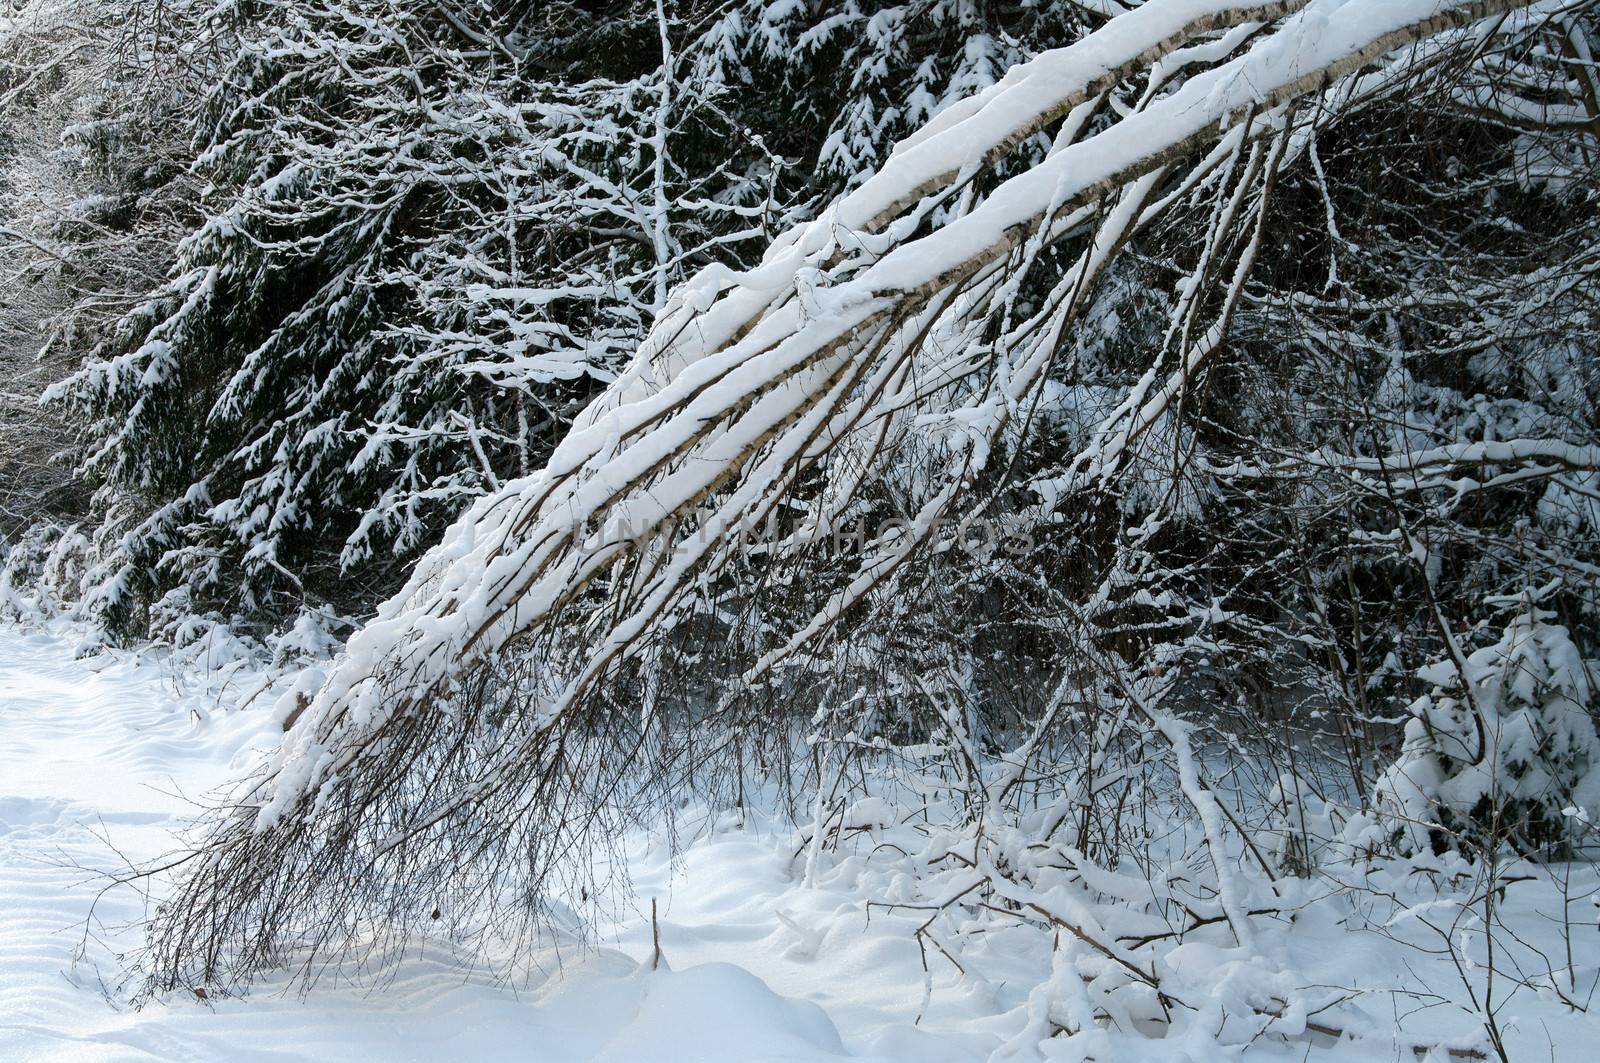 Birch branches in the winter wood bent under weight of snow.